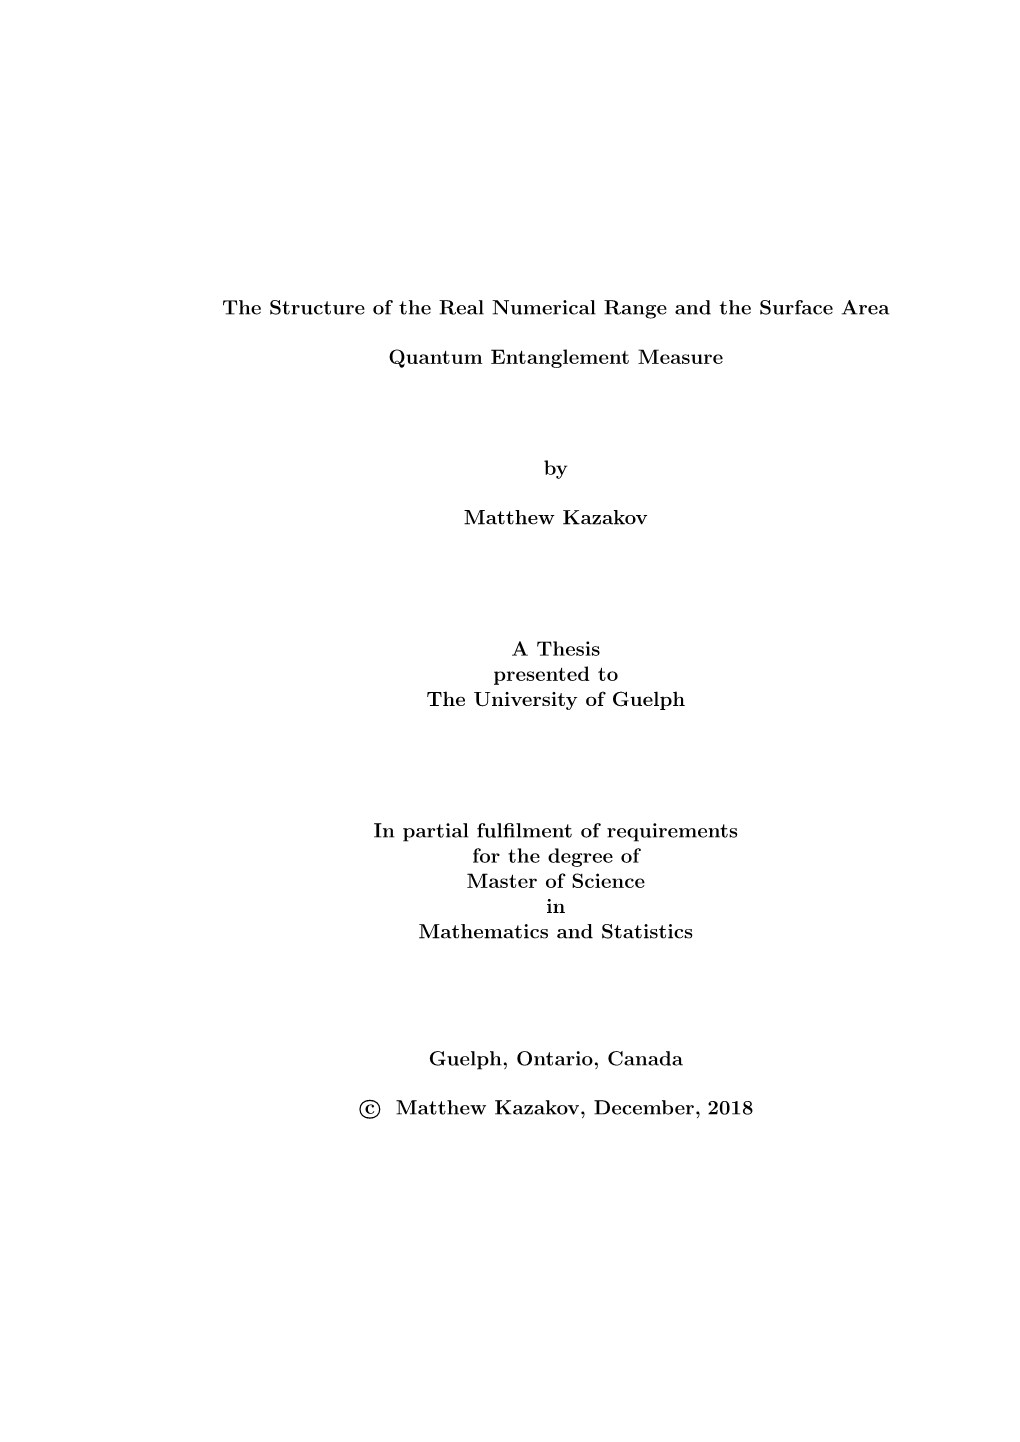 The Structure of the Real Numerical Range and the Surface Area Quantum Entanglement Measure by Matthew Kazakov a Thesis Presente